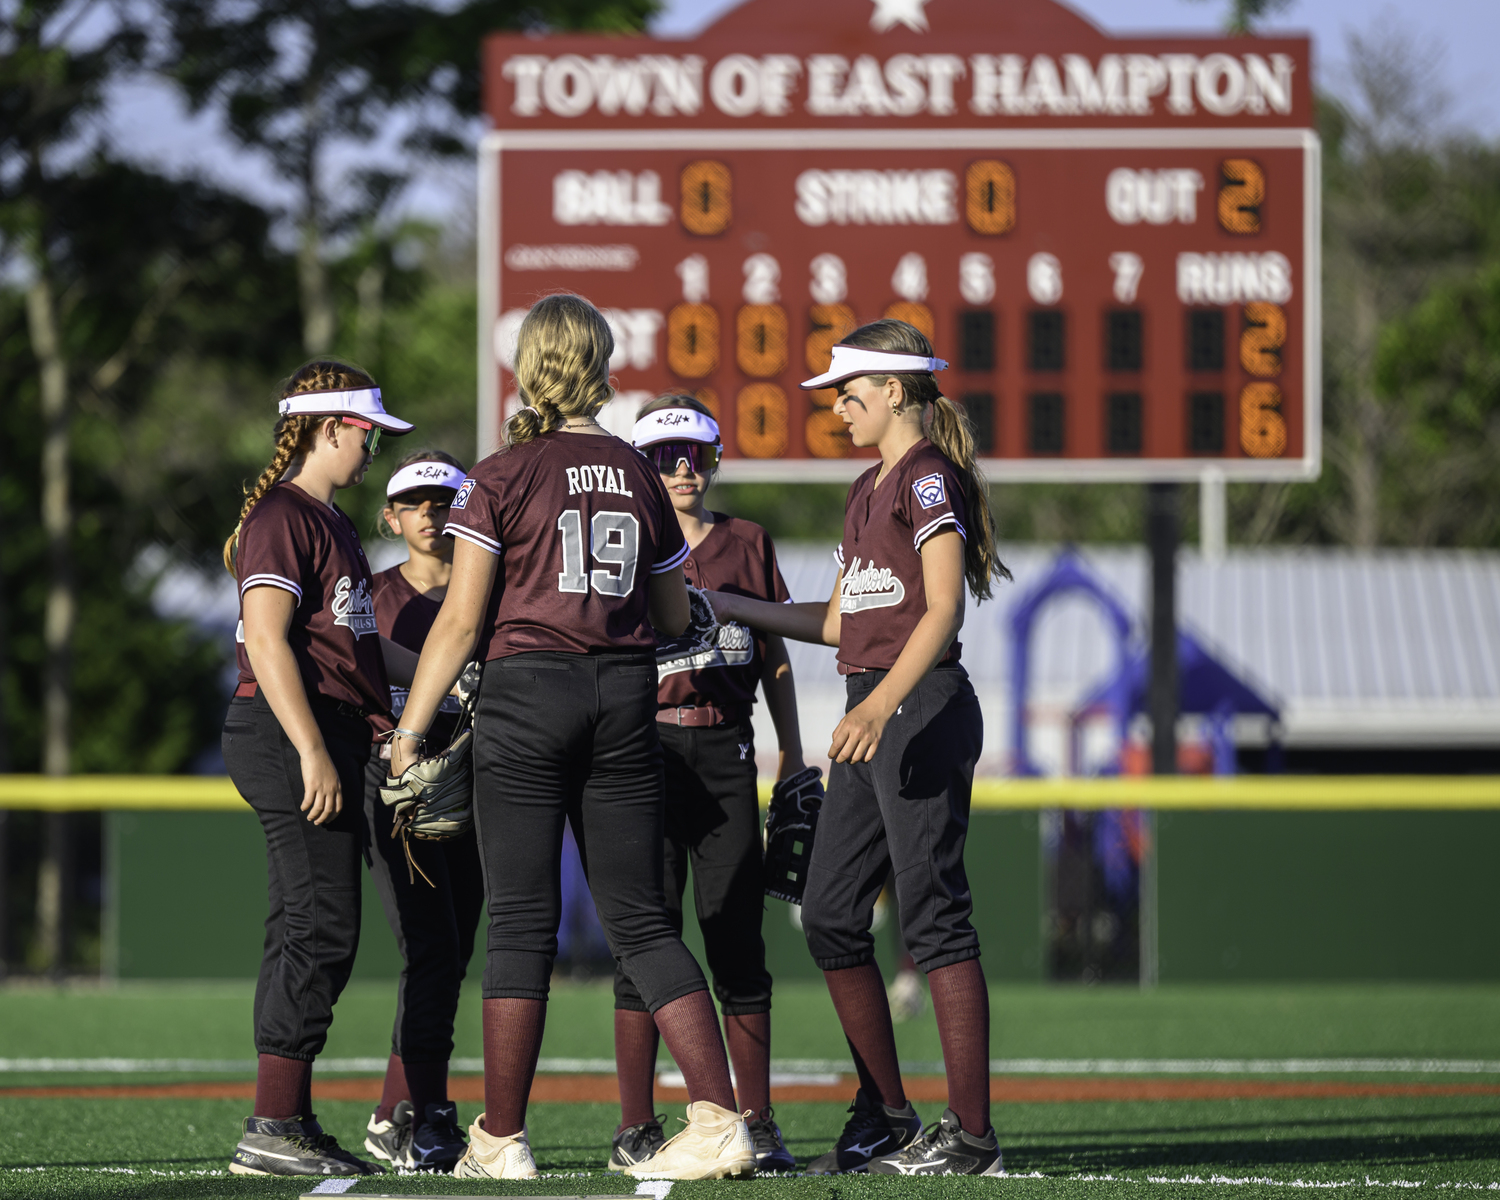 The East Hampton 12-and-under softball All-Stars lost a close game, 8-7, to Moriches Bay at the Stephen Hands Path Sports Complex on June 20. MARIANNE BARNETT